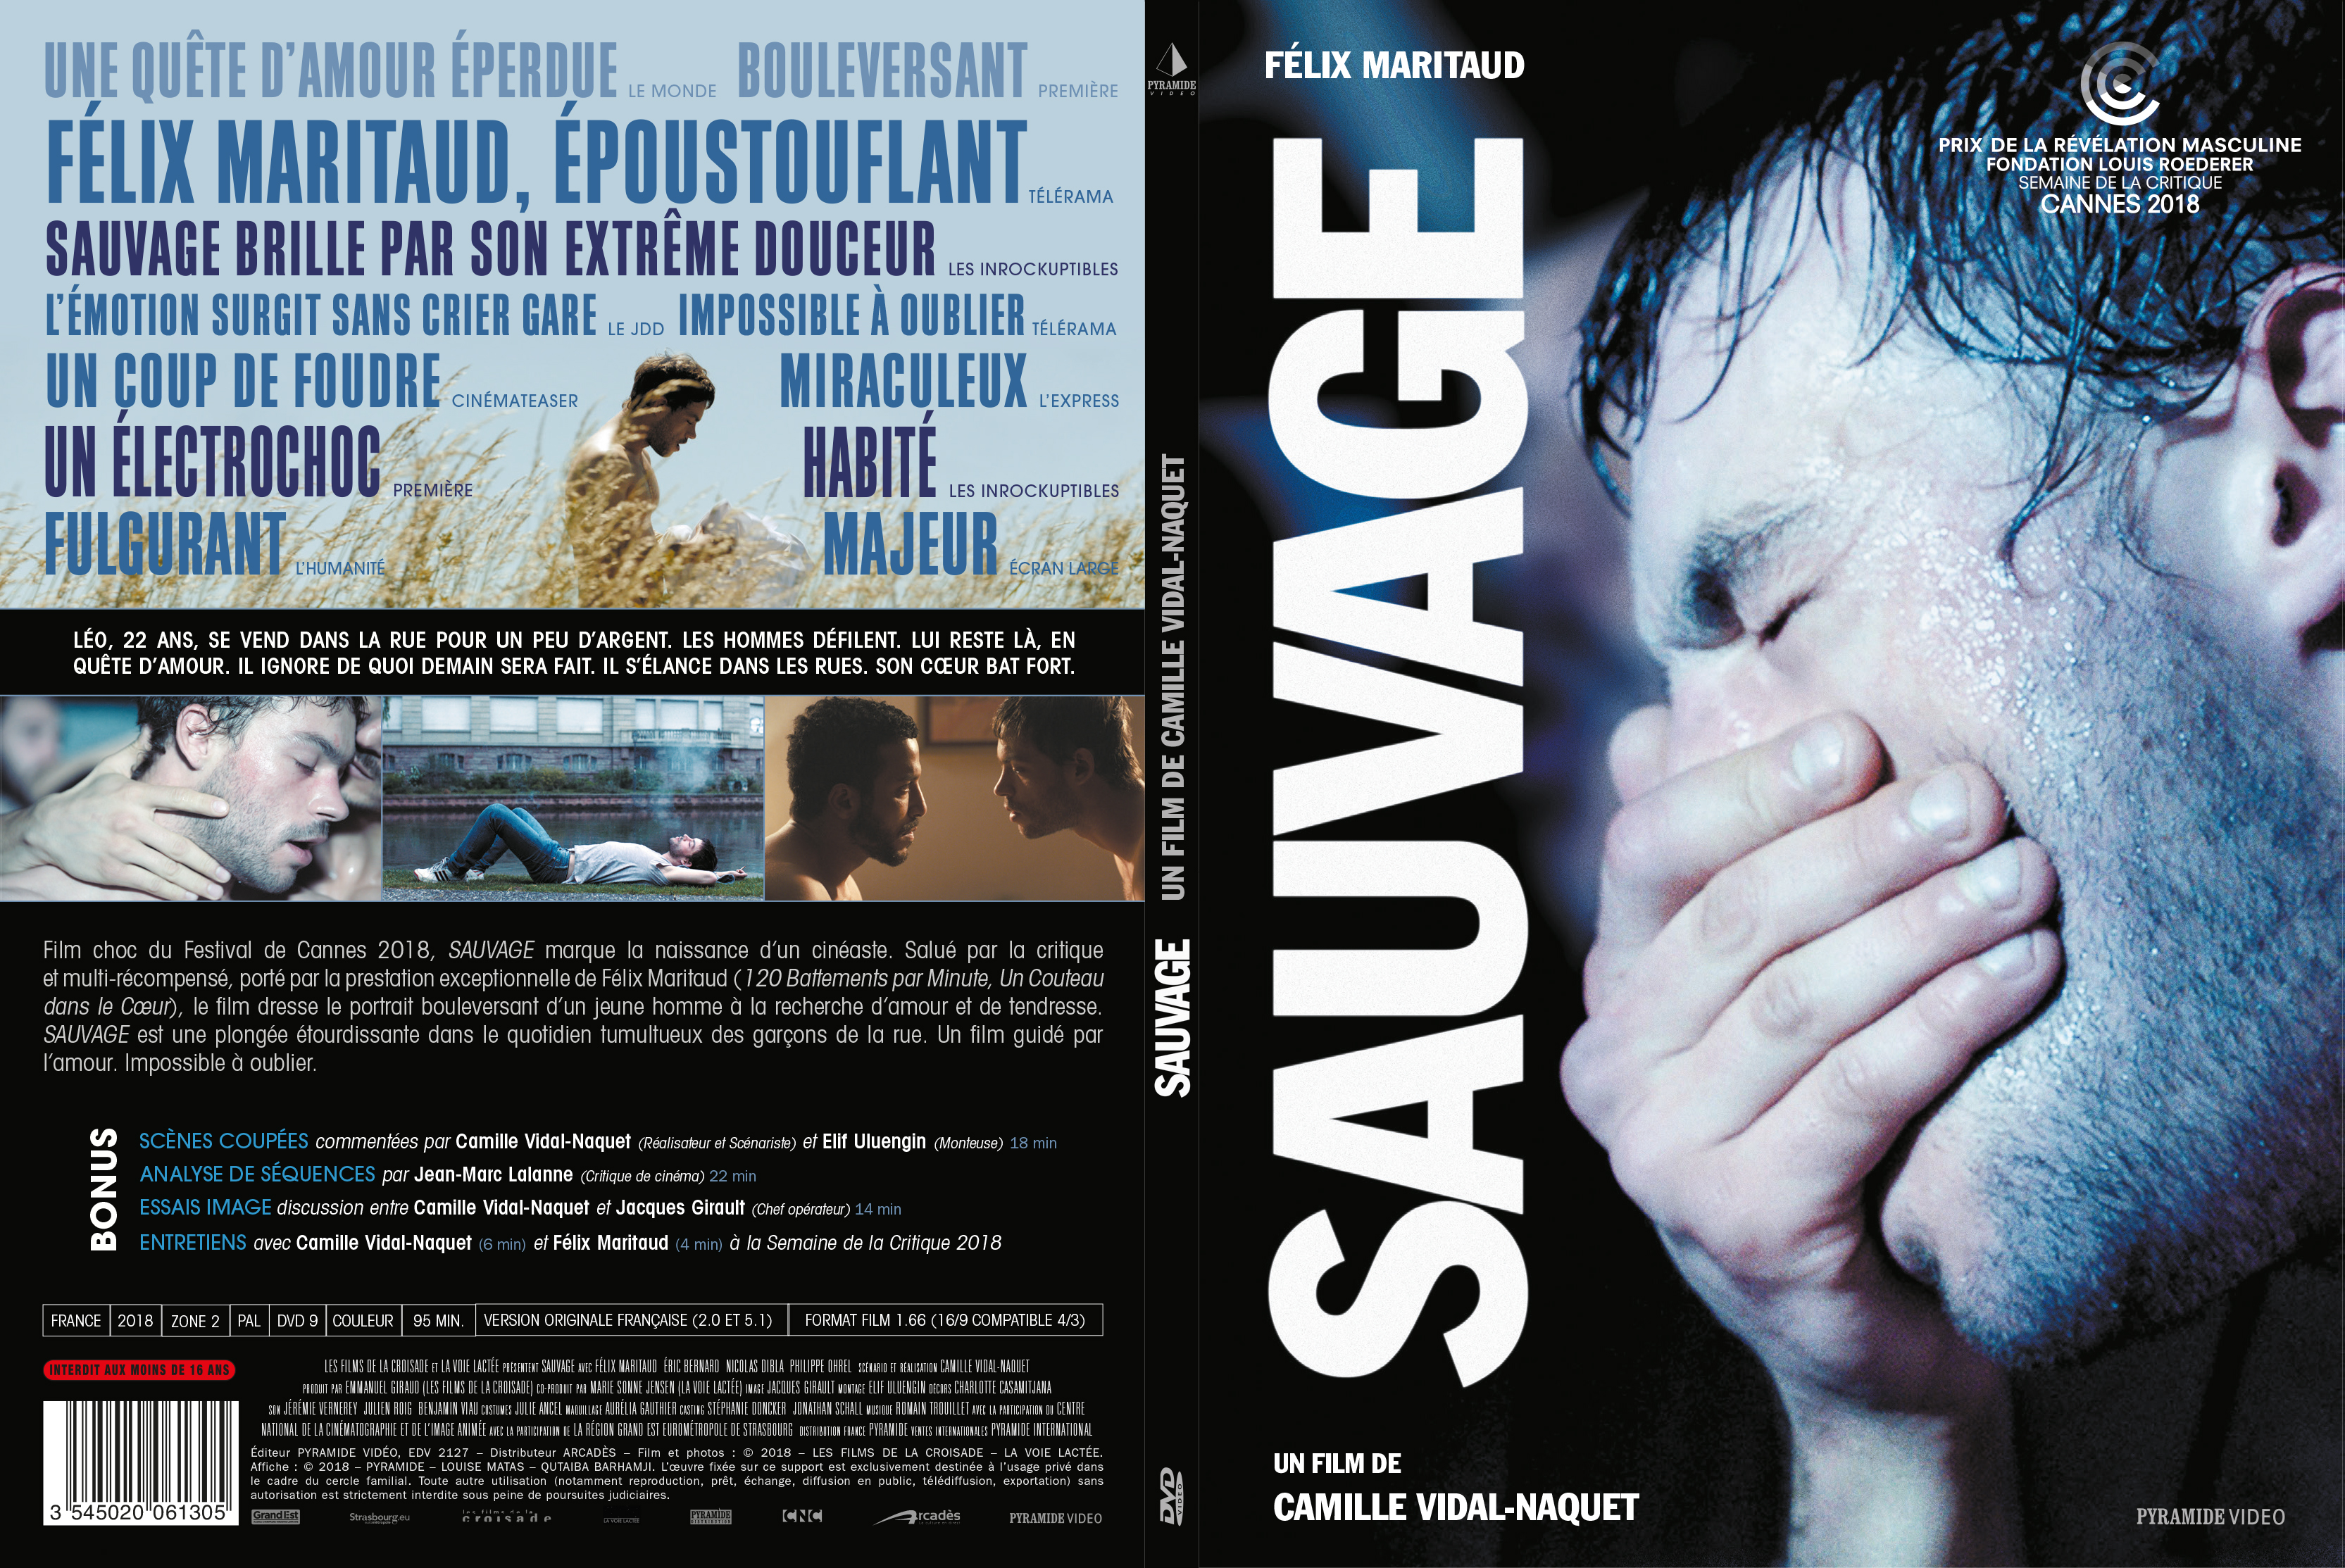 Jaquette DVD Sauvage